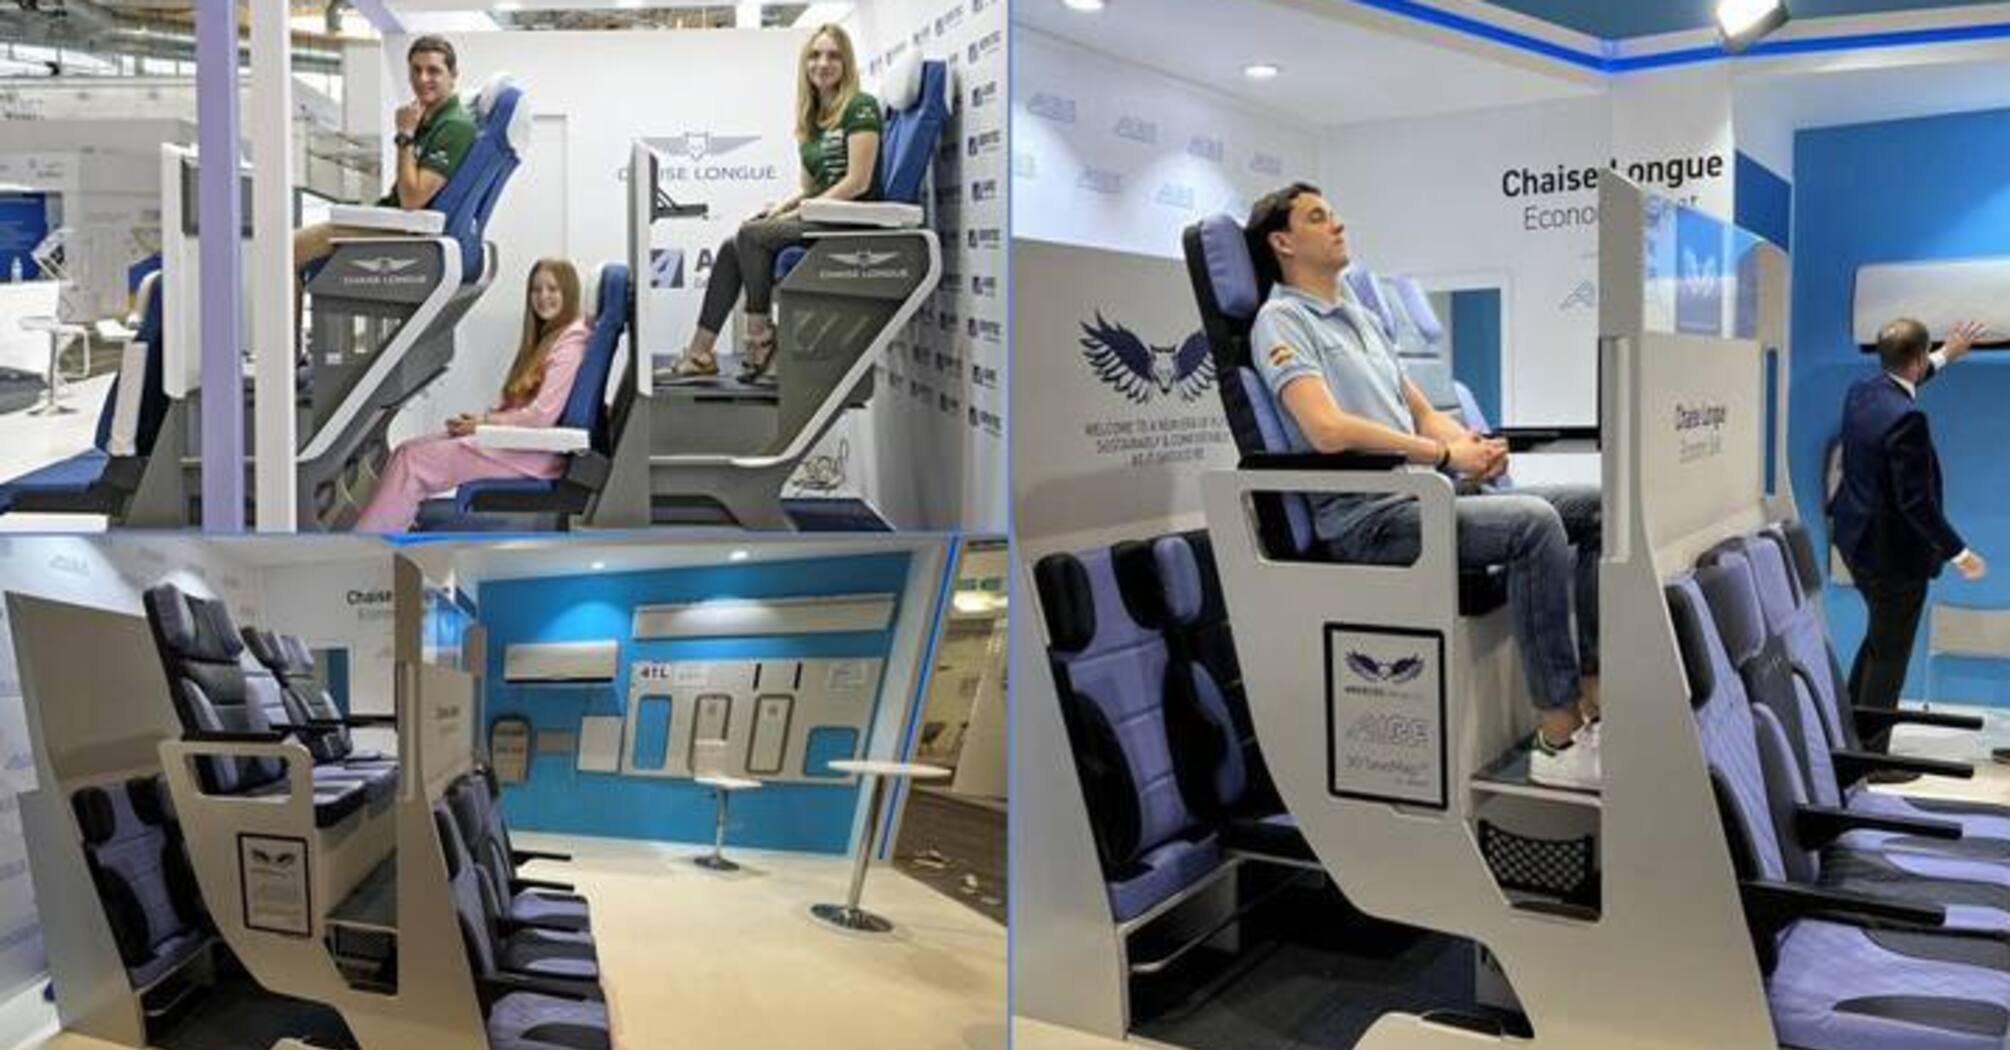 Double-decker seats in airplane cabins: Can it become a reality?